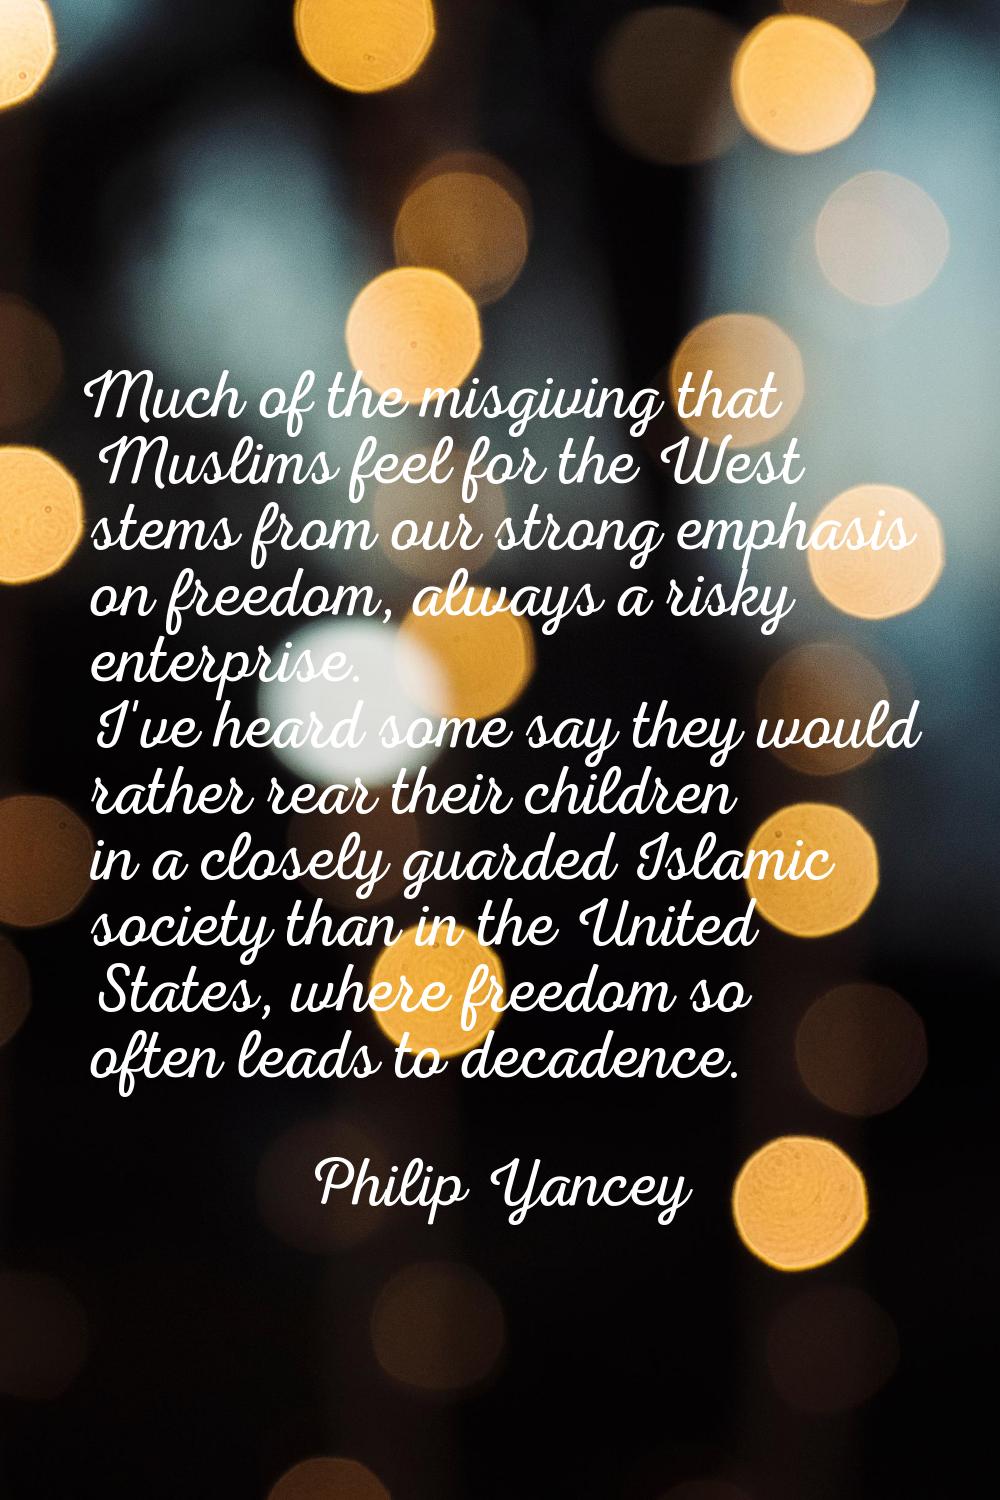 Much of the misgiving that Muslims feel for the West stems from our strong emphasis on freedom, alw